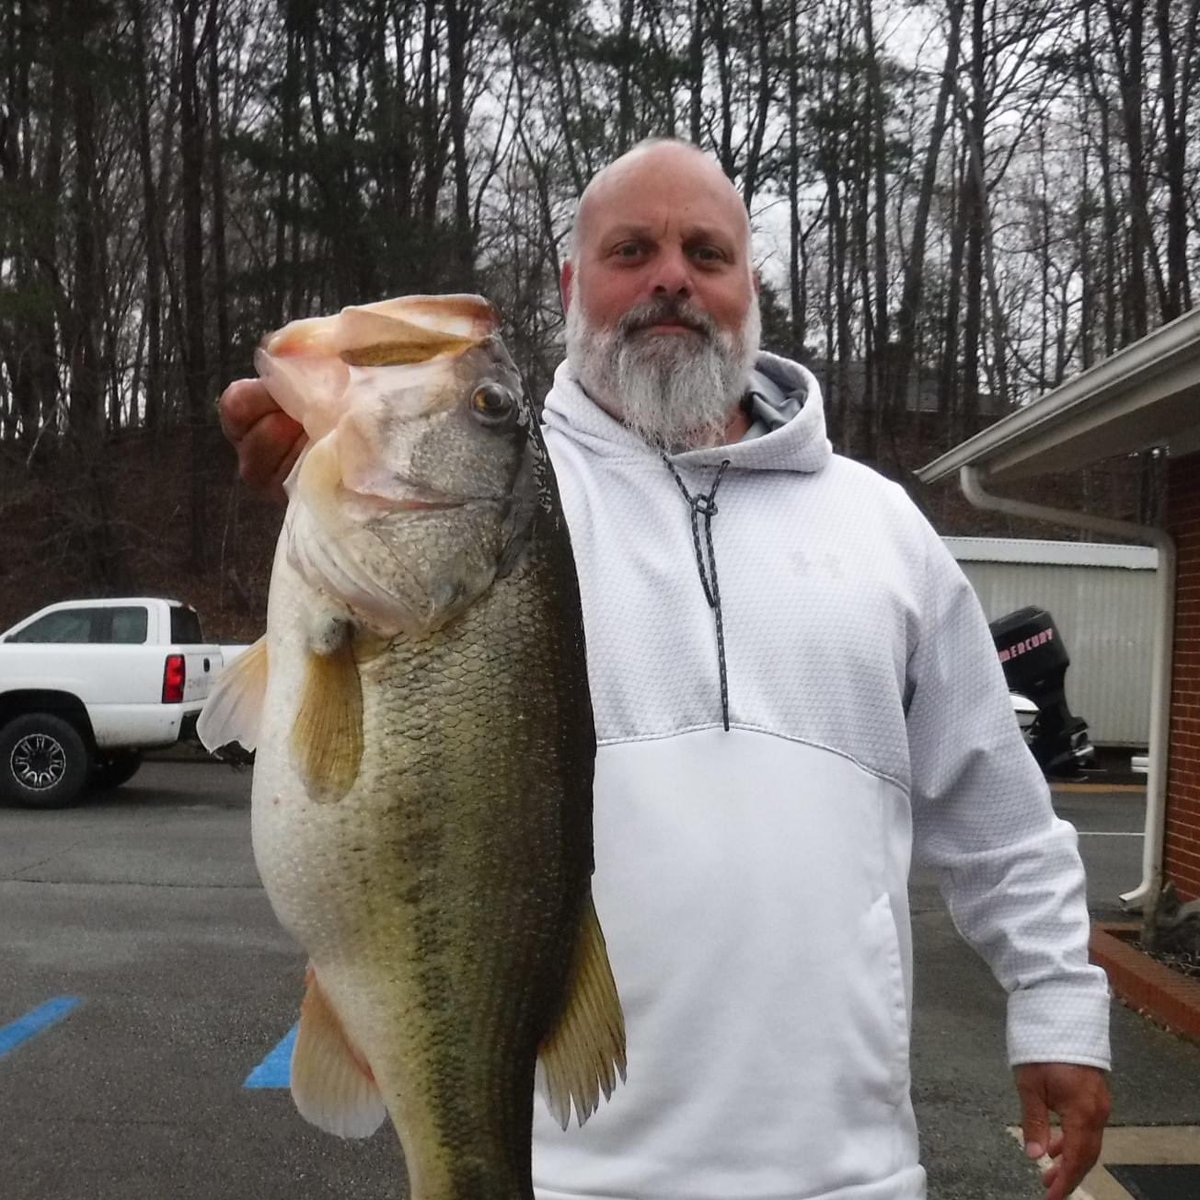 March's Big Bass Tournament winner was Keith Patterson with an 8.31 lb. Largemouth Bass at Graham-Mebane Lake. Learn more about Graham-Mebane Lake's tournaments and other lake programs at cityofgraham.com/grpd-lake-prog….